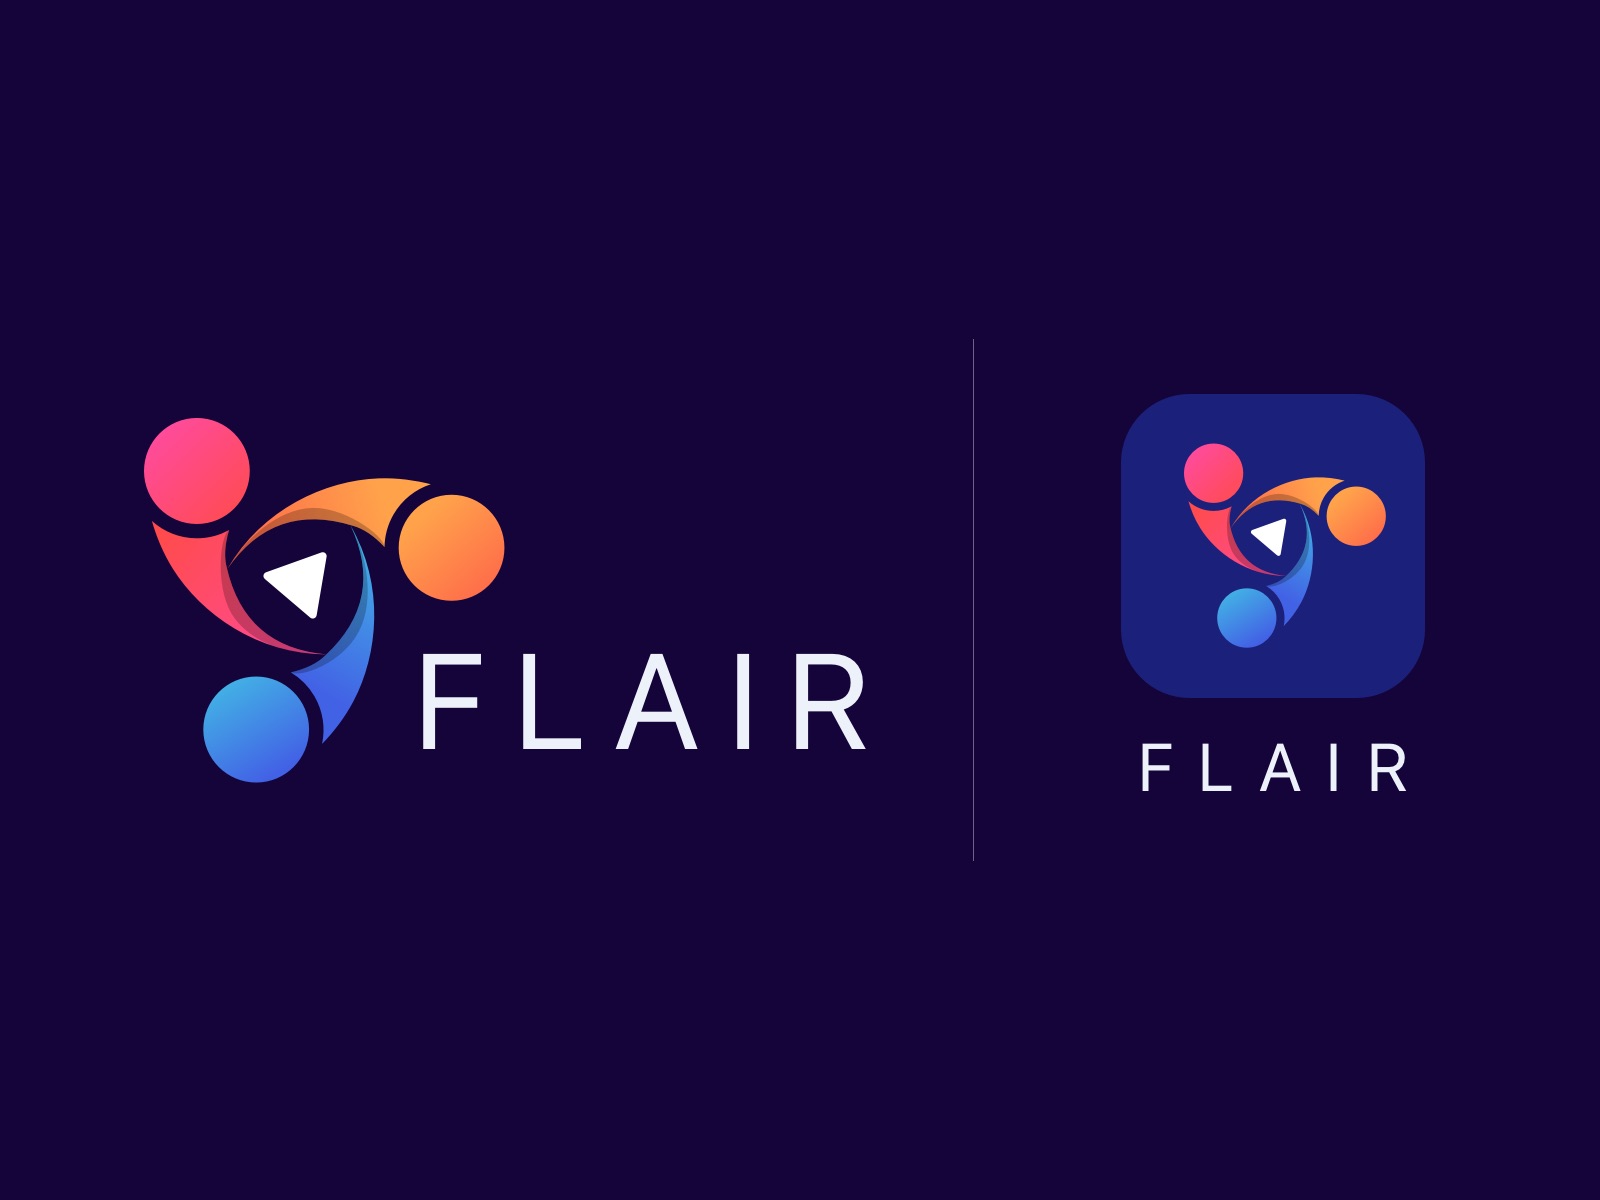 Download FLAIR de Logo PNG and Vector (PDF, SVG, Ai, EPS) Free